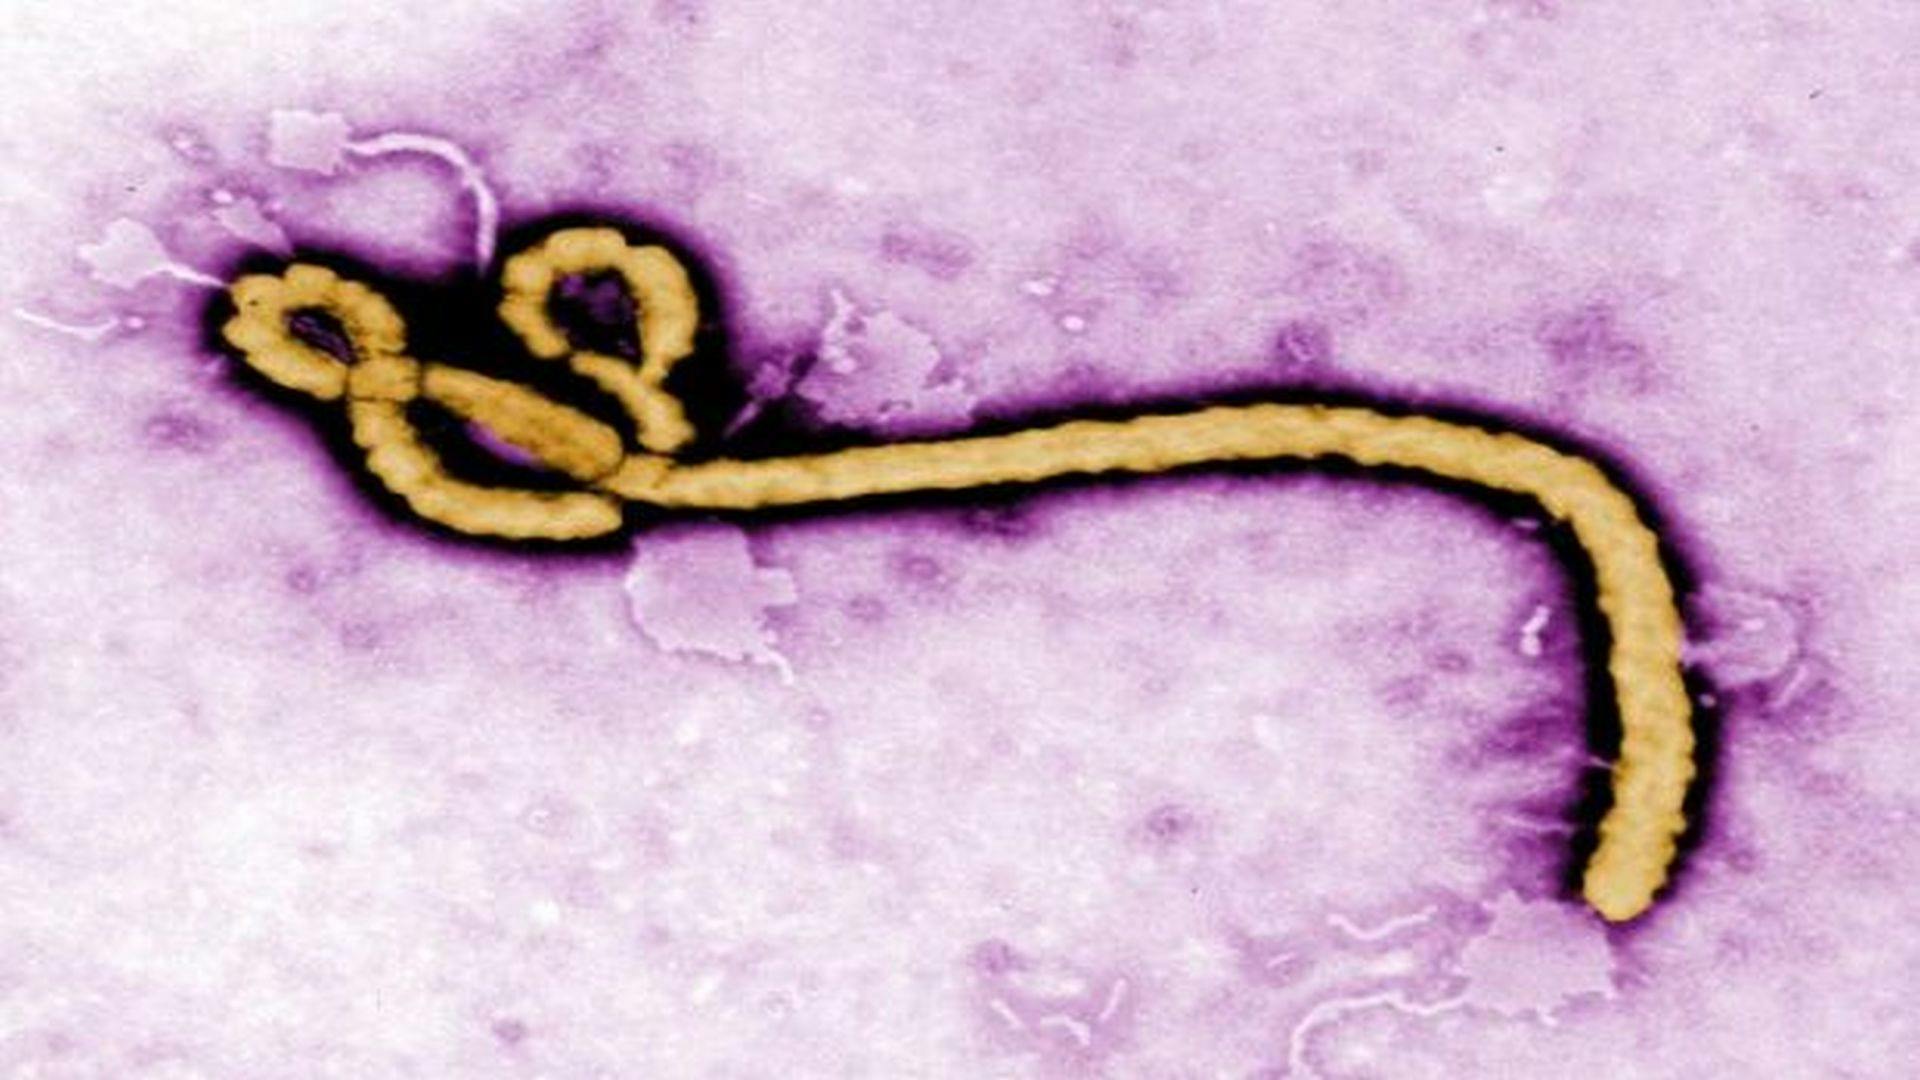 Scientists Unlock Mysteries of How Ebola Uses People's Immune Defenses to Cause Infection